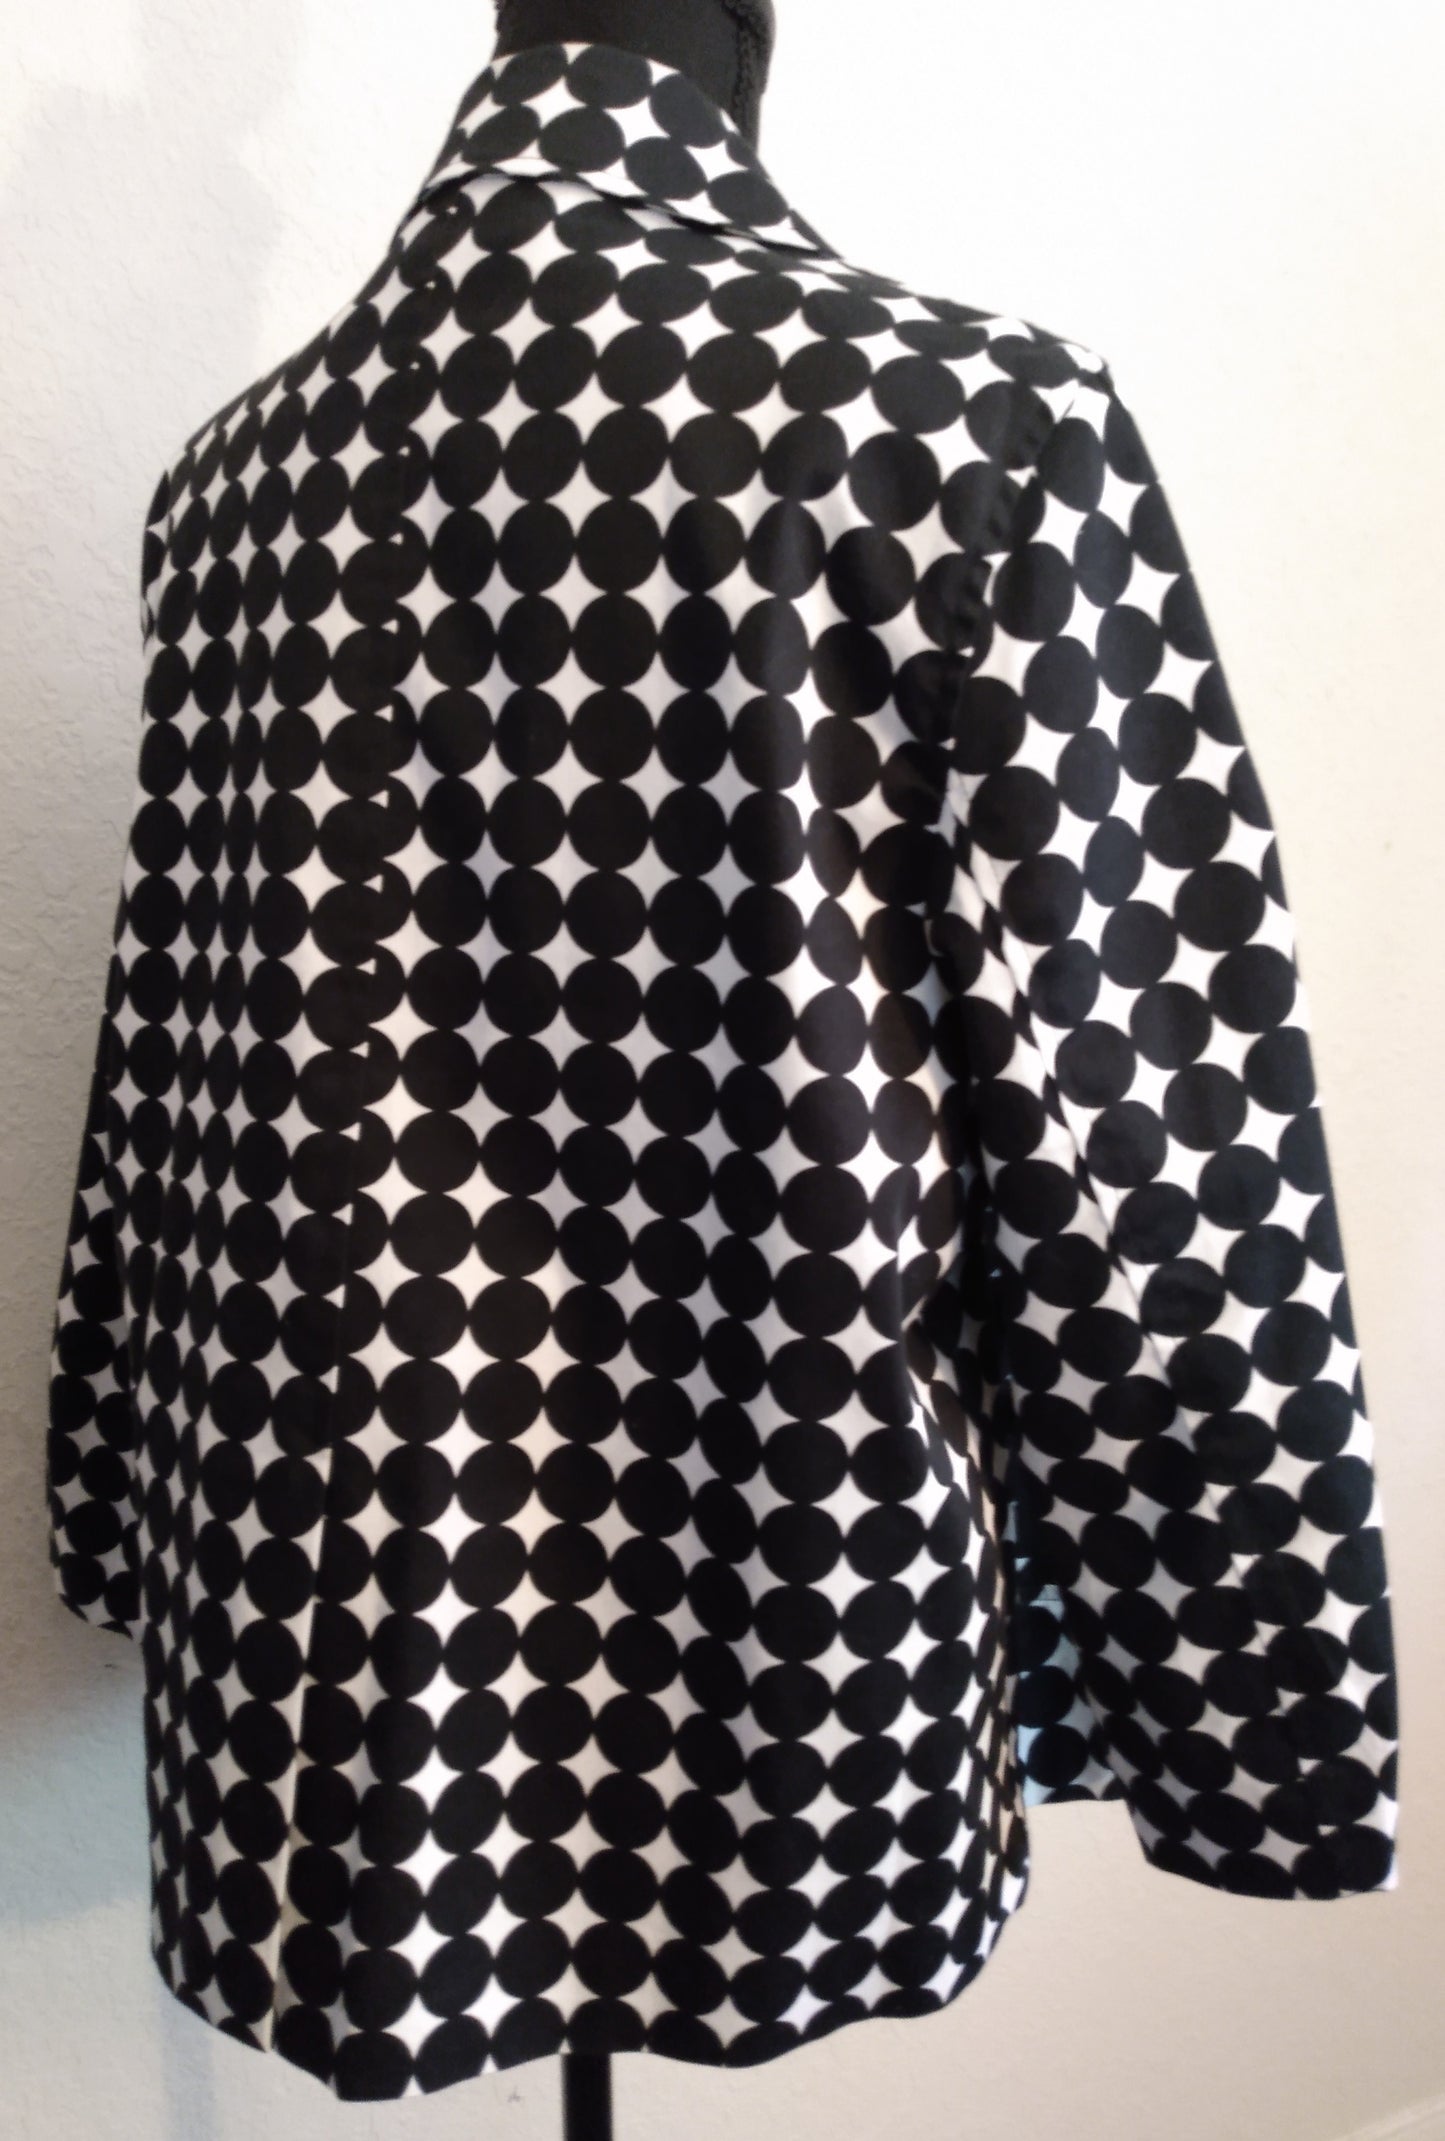 Black and White Dotted Jacket